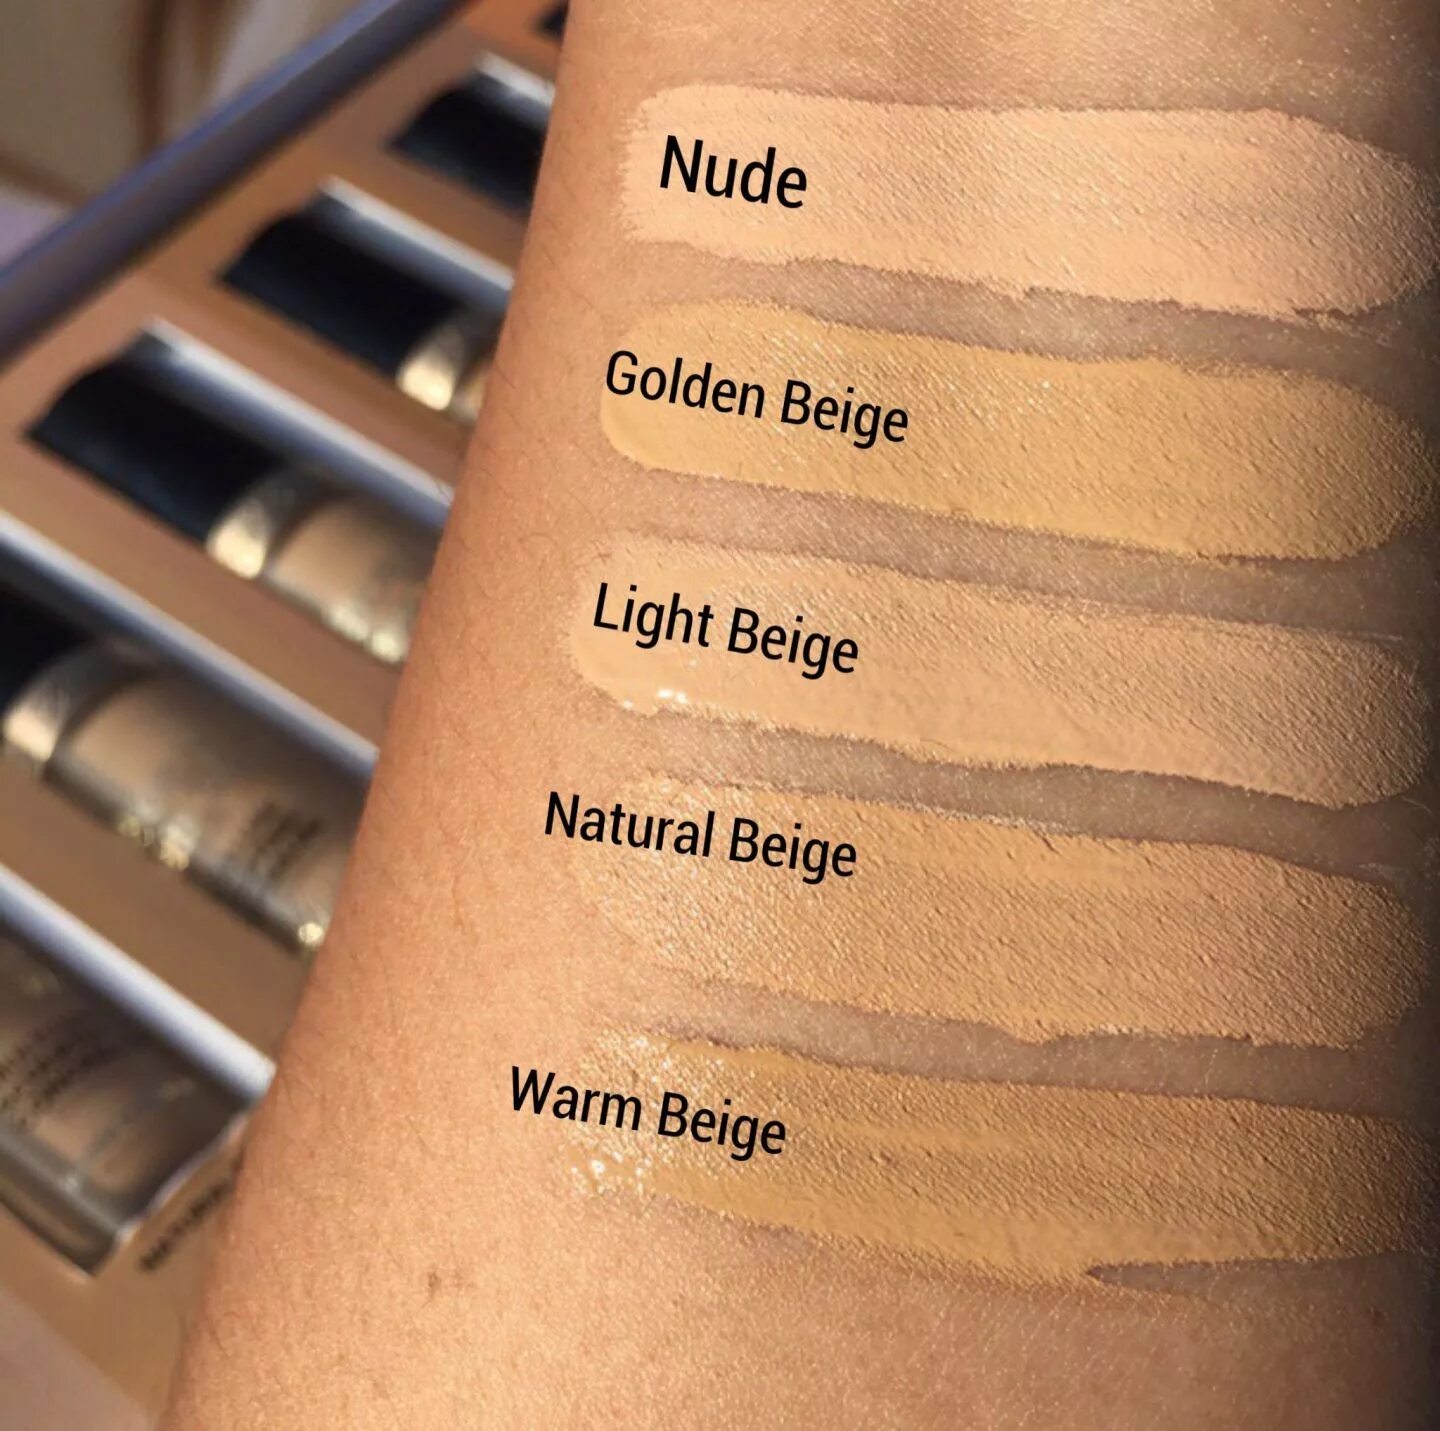 Natural beige. Too faced born this way Multi-use Sculpting concealer; “natural Beige”. Too faced консилер. Консилер too faced born. Born this way консилер.